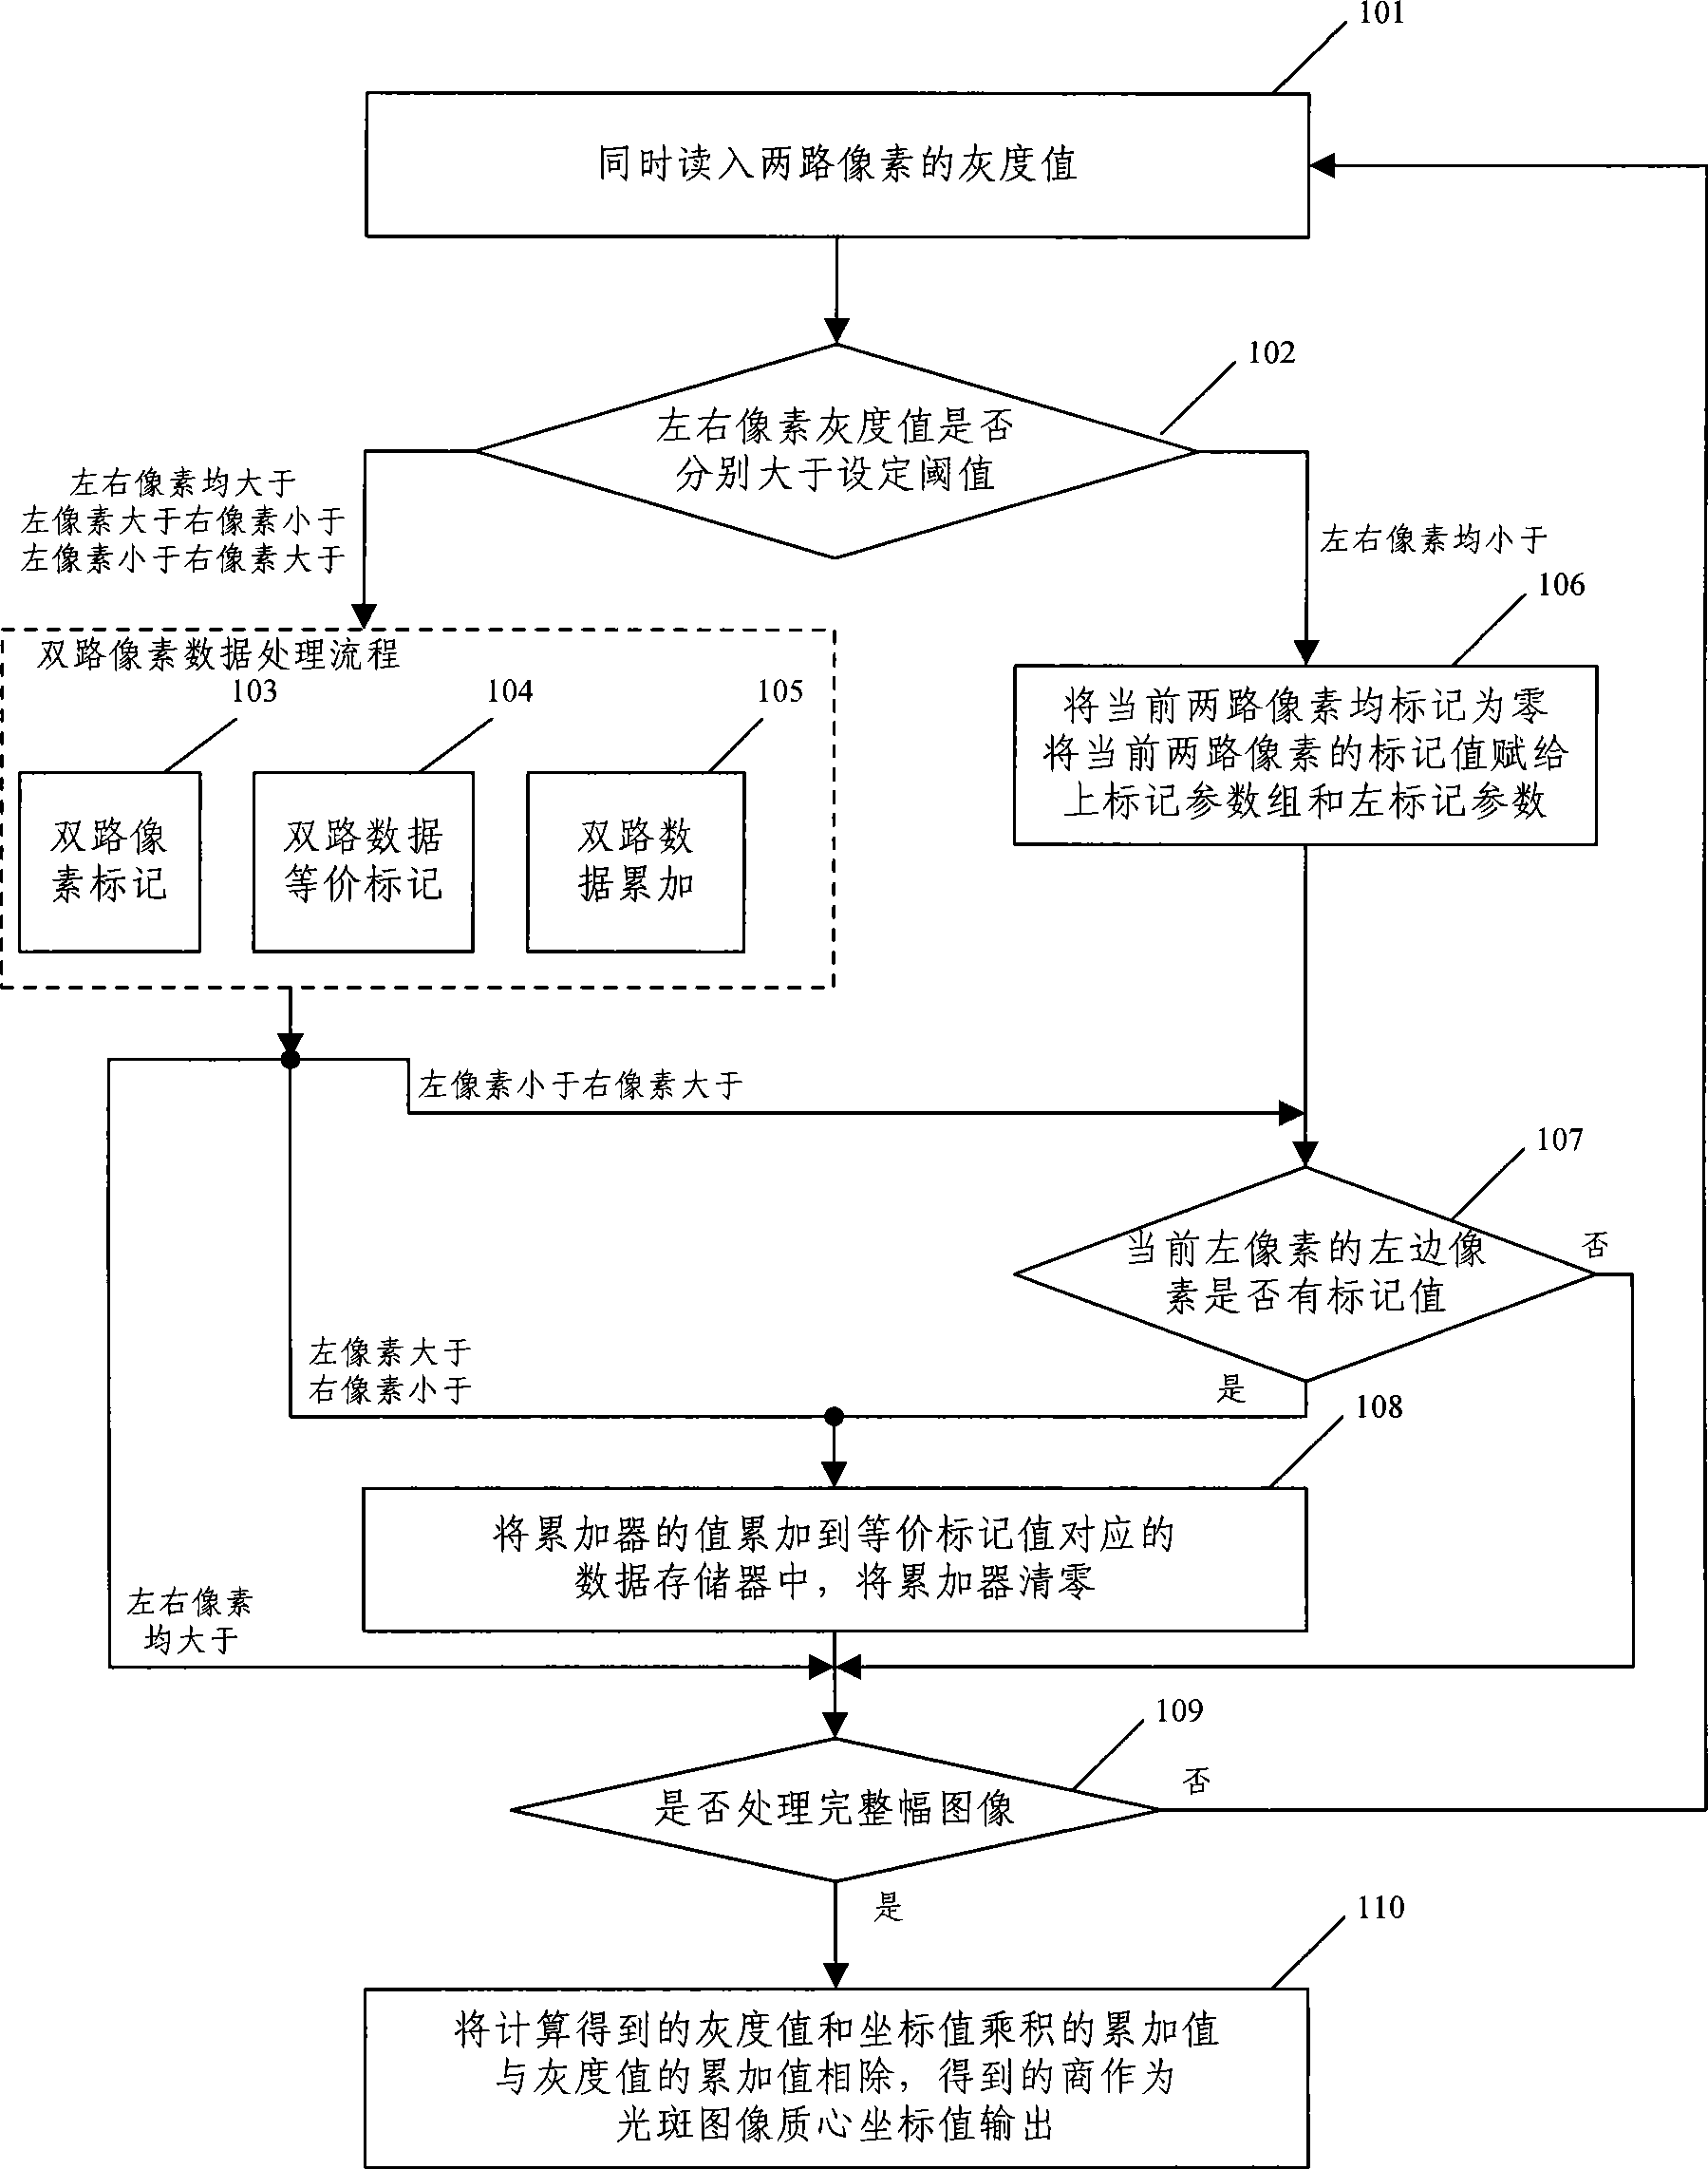 Two-way mass center tracking imaging method and device